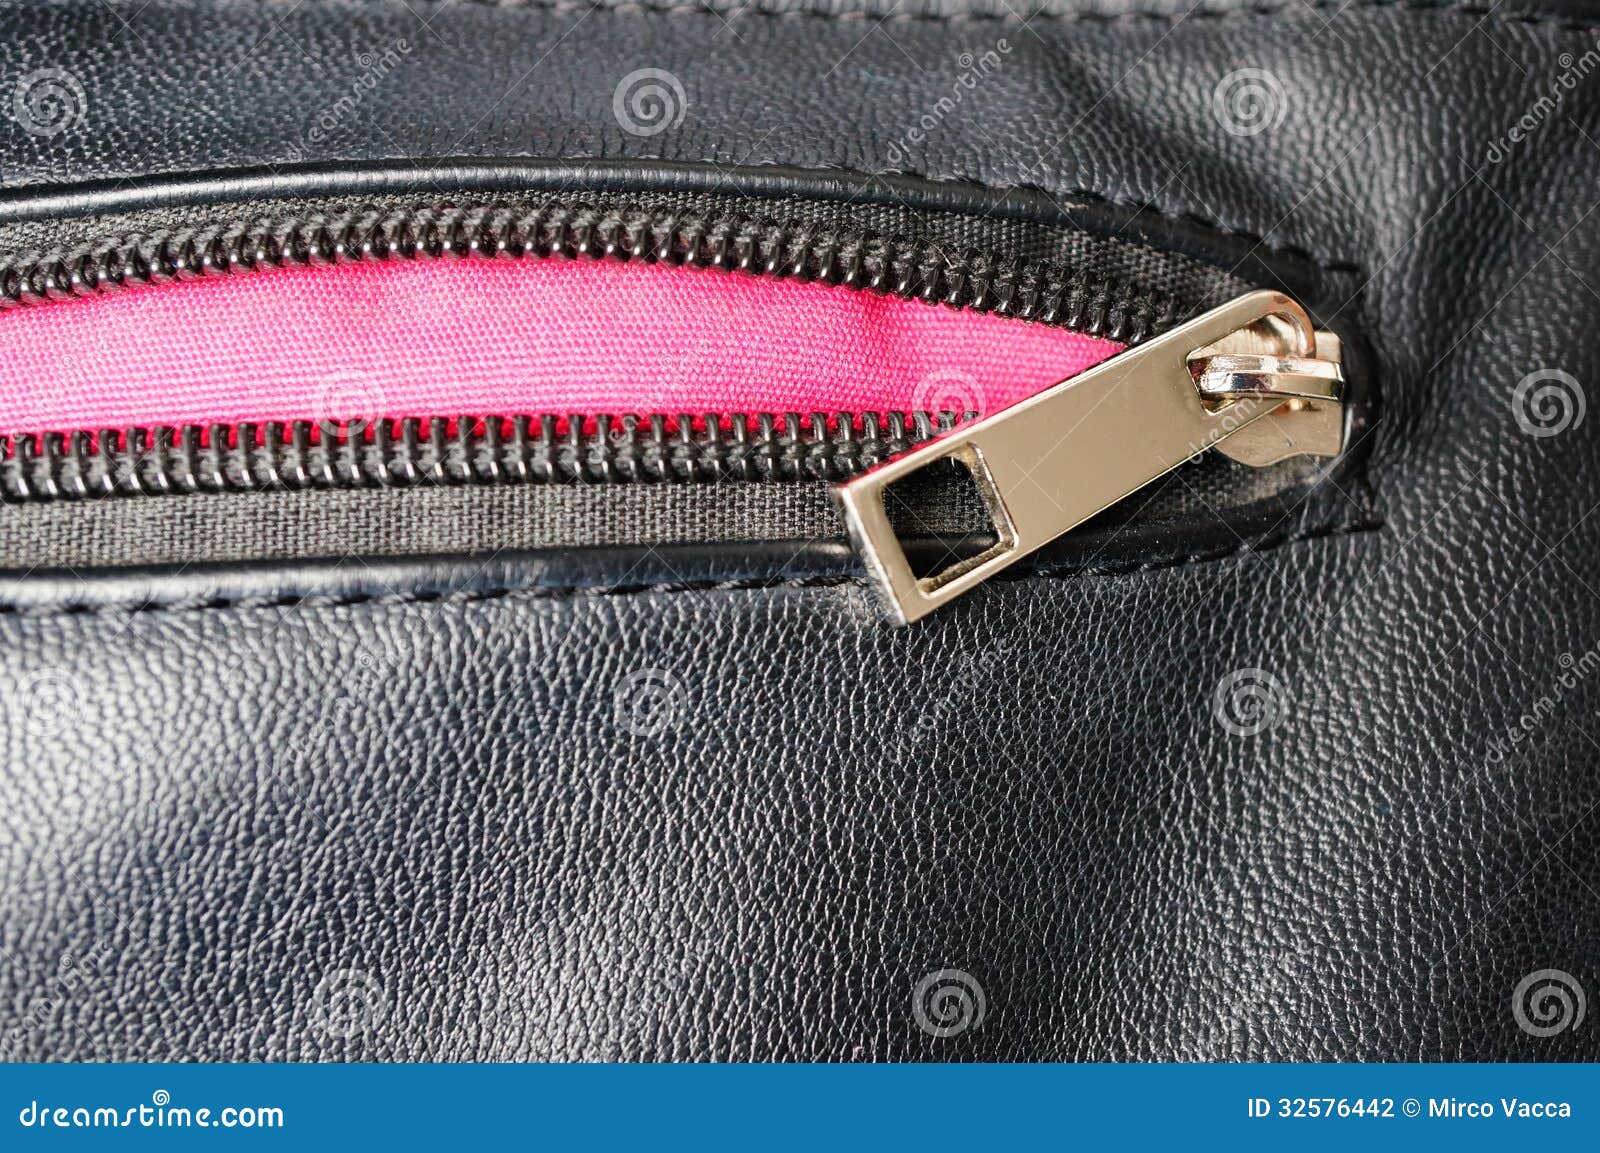 Bag zipper stock photo. Image of leather, separation - 32576442